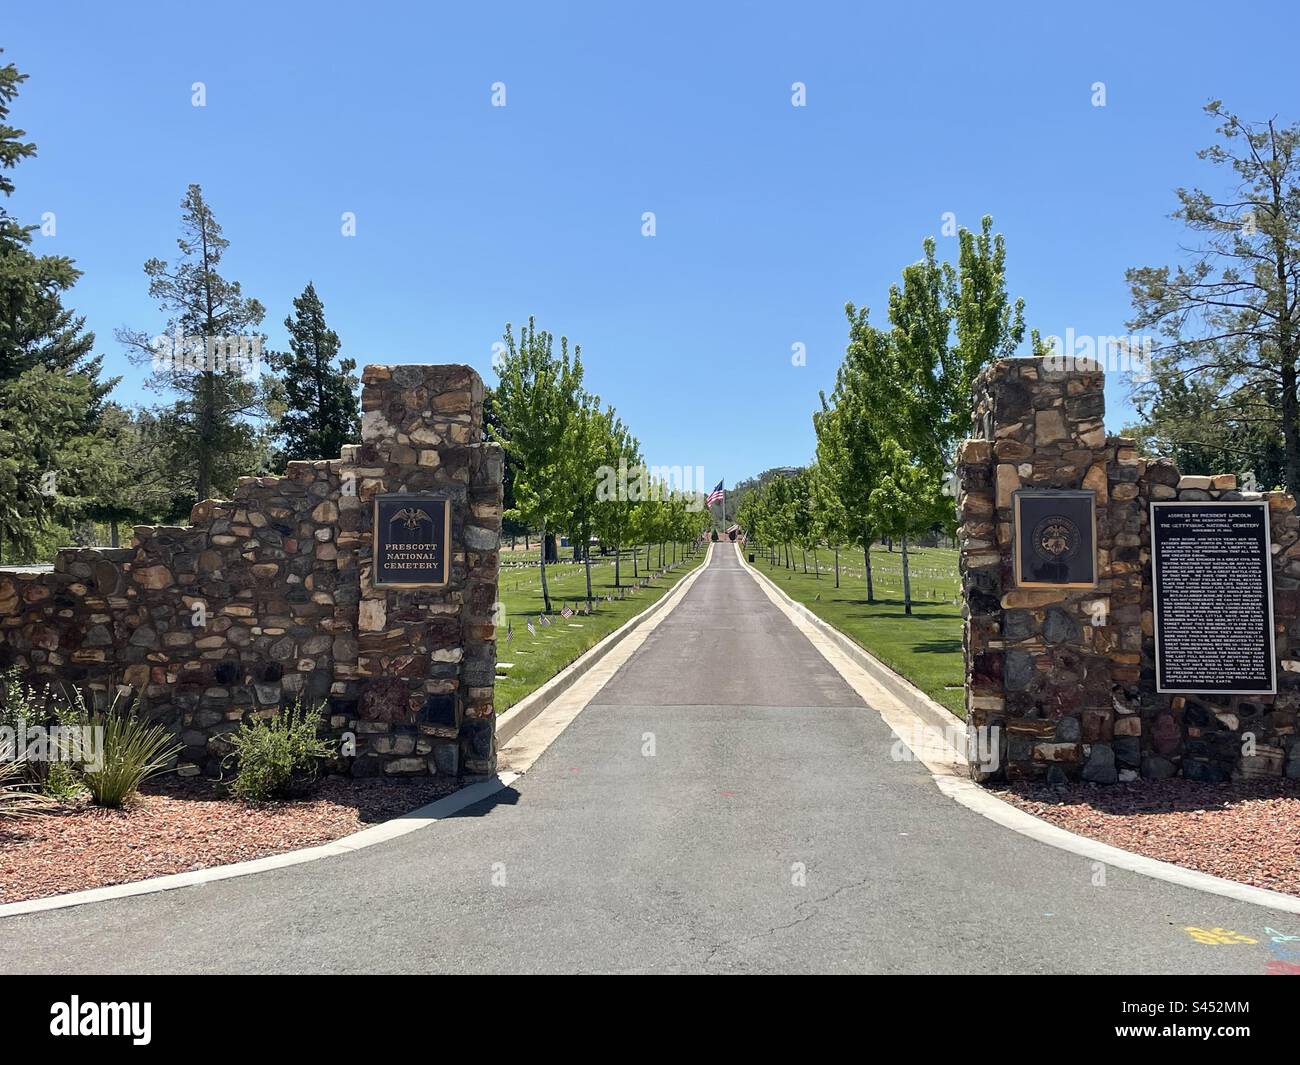 Prescott National Cemetery, historic entrance gate view, center drive leads up to American Flag, Veterans’ graves marked with American Flags, brilliant blue sky, framed by green trees, Arizona, USA Stock Photo